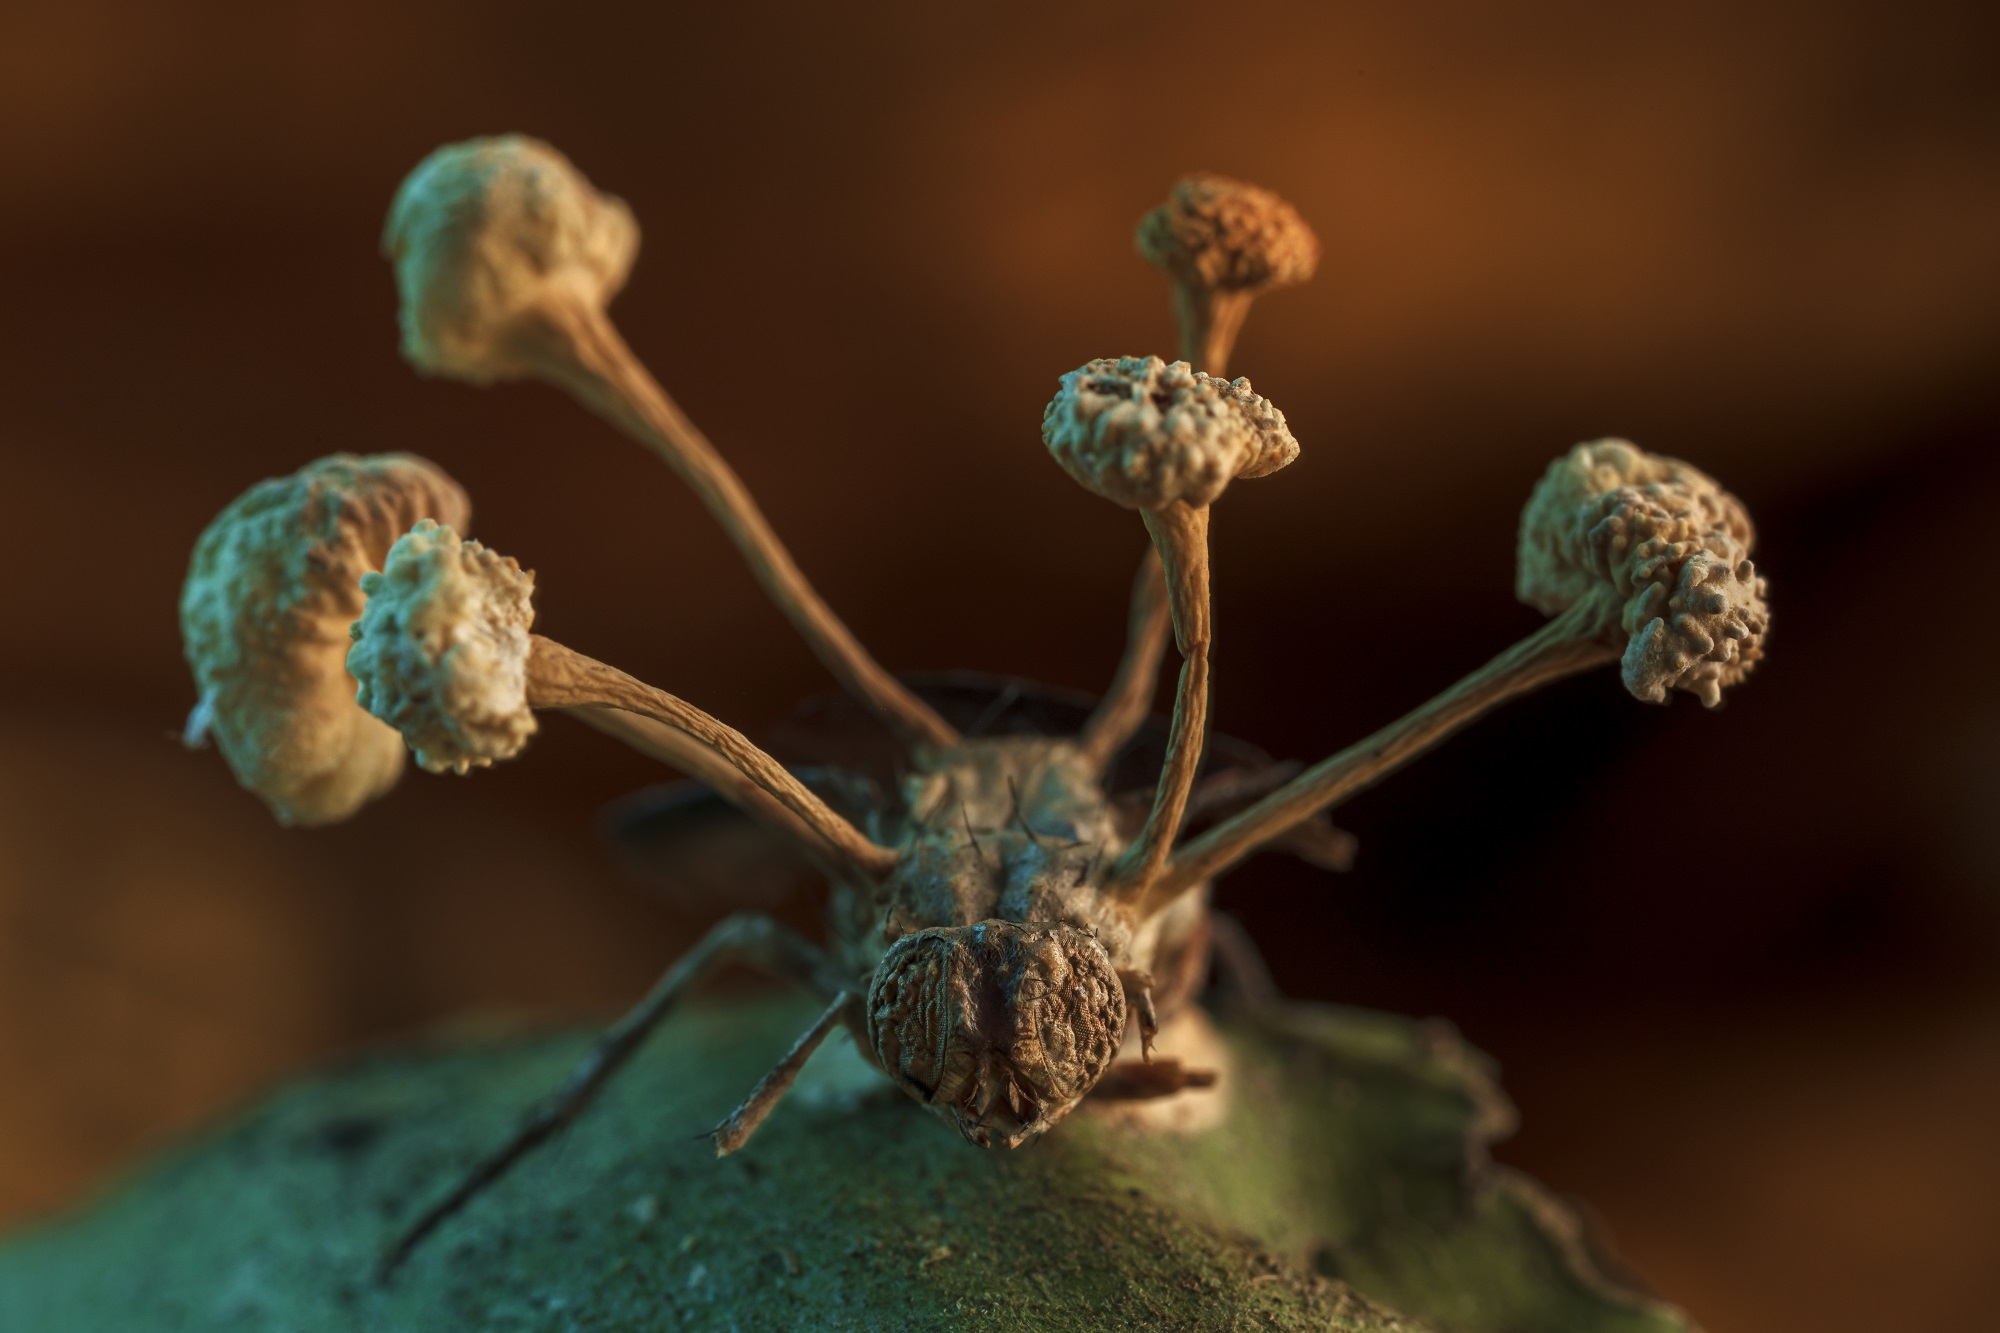 Parasitic fungi bursting from a fly's back in macro